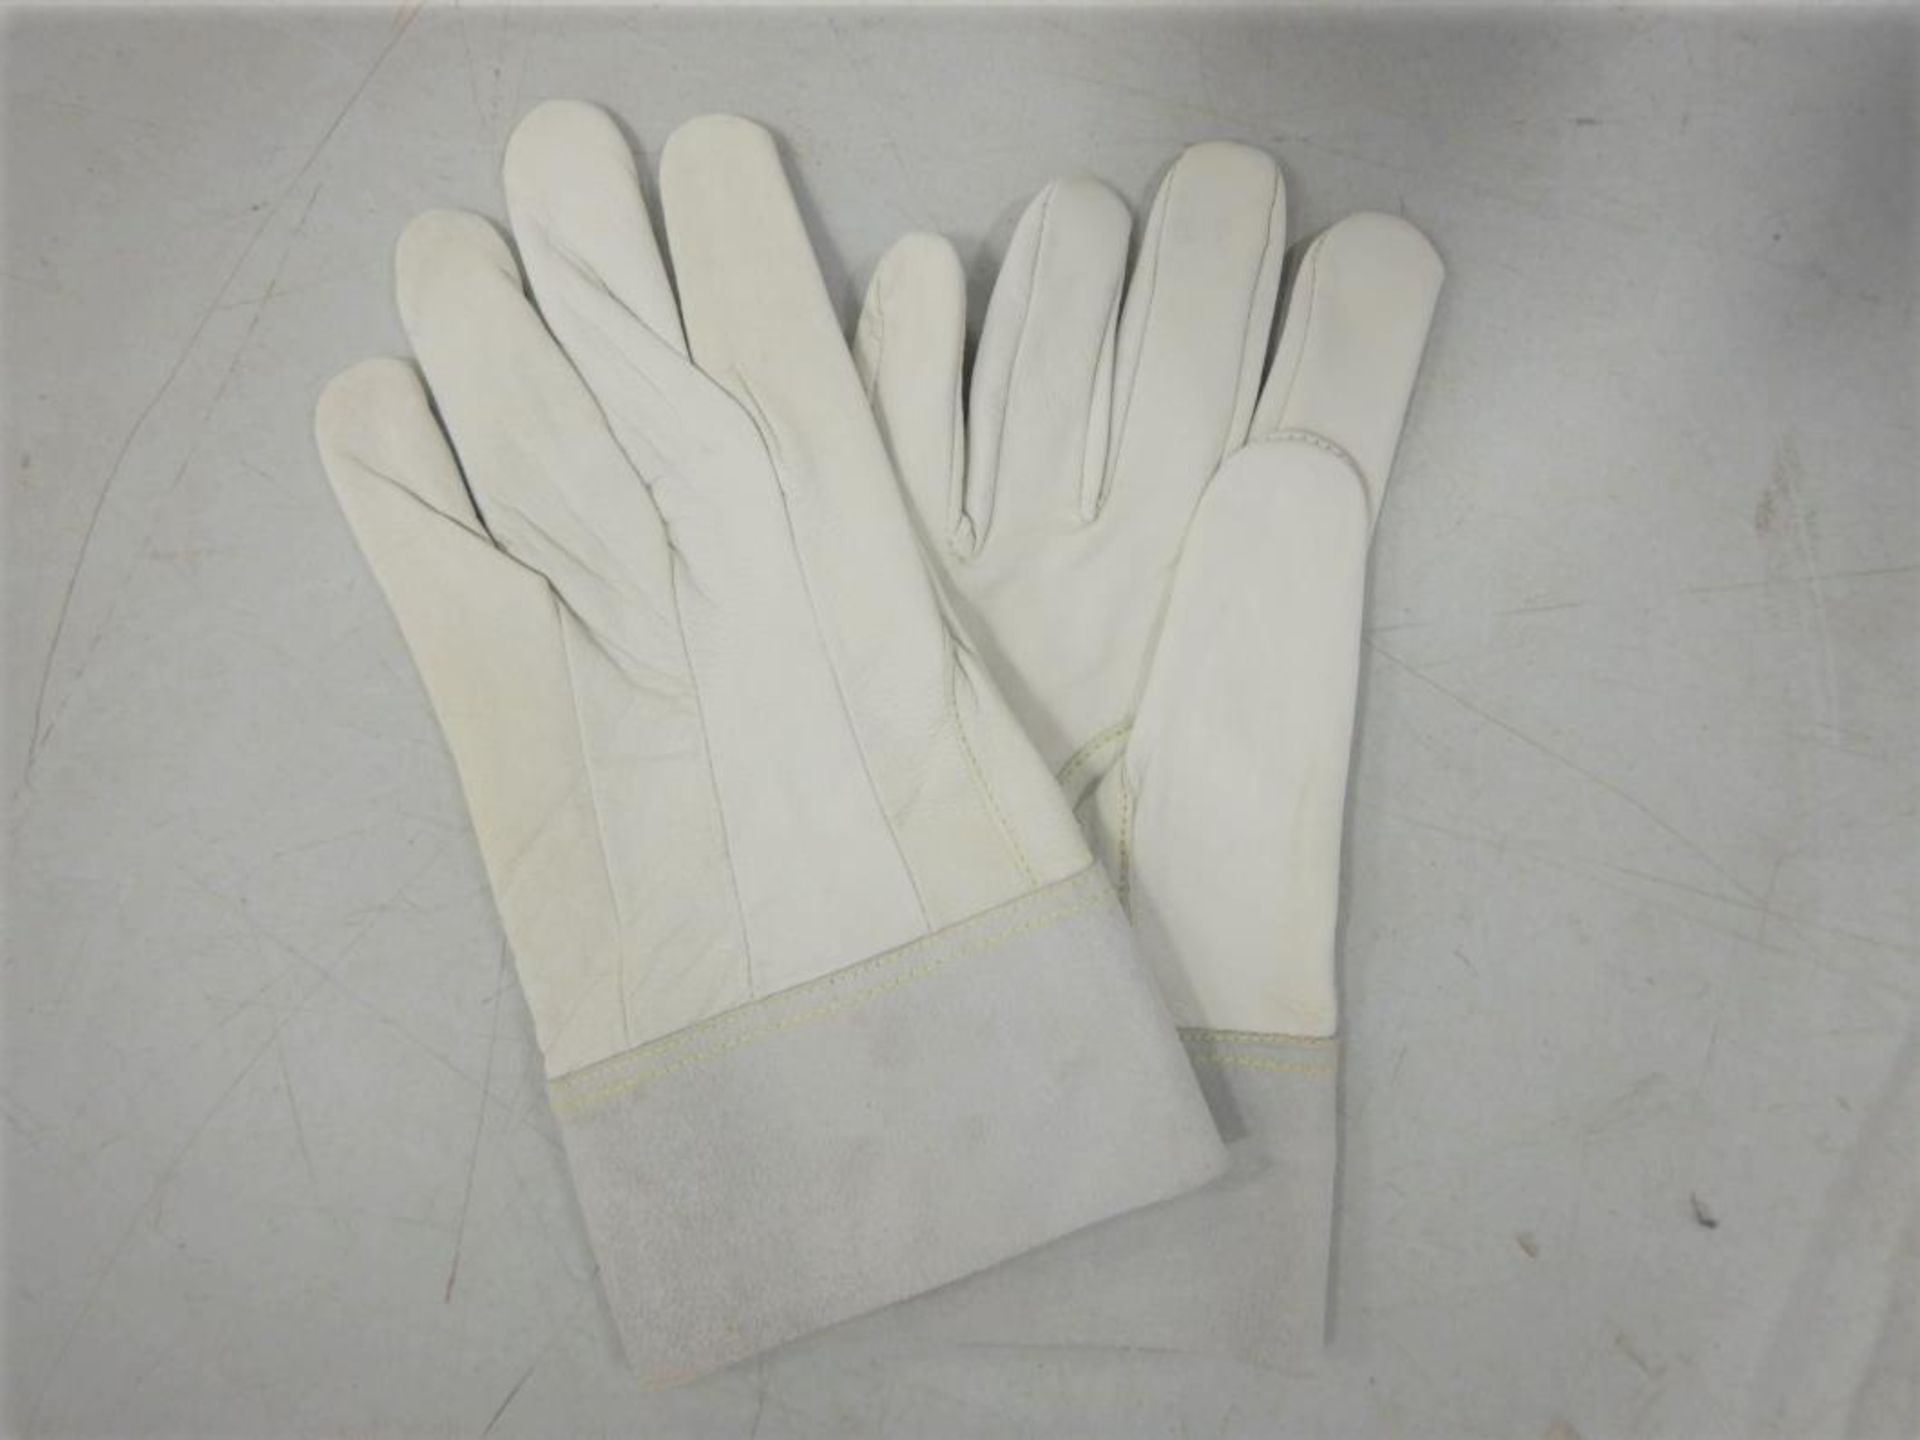 24 PAIRS OF LEATHER WORK GLOVES SZ M - Image 3 of 3